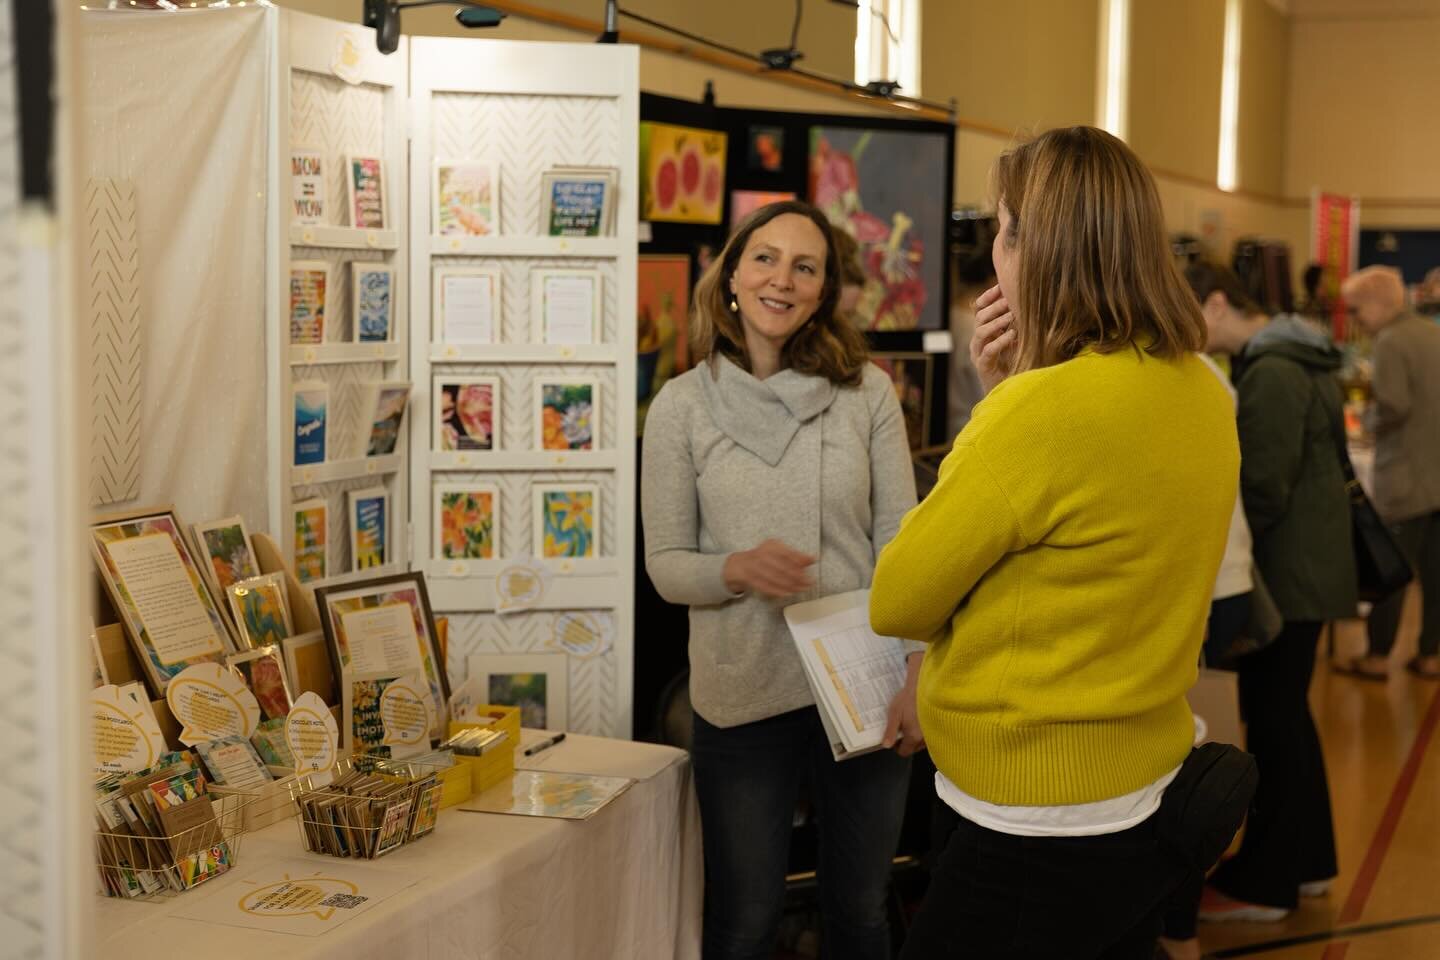 Art Fair is back in May! Artist Vendor applications are open NOW

Rieke Art Fair returns on Sunday, May 19, during the Hillsdale Farmer&rsquo;s Market from 9:00 am to 2:30 pm at Rieke Elementary School! Find unique art and handmade treasures from loc